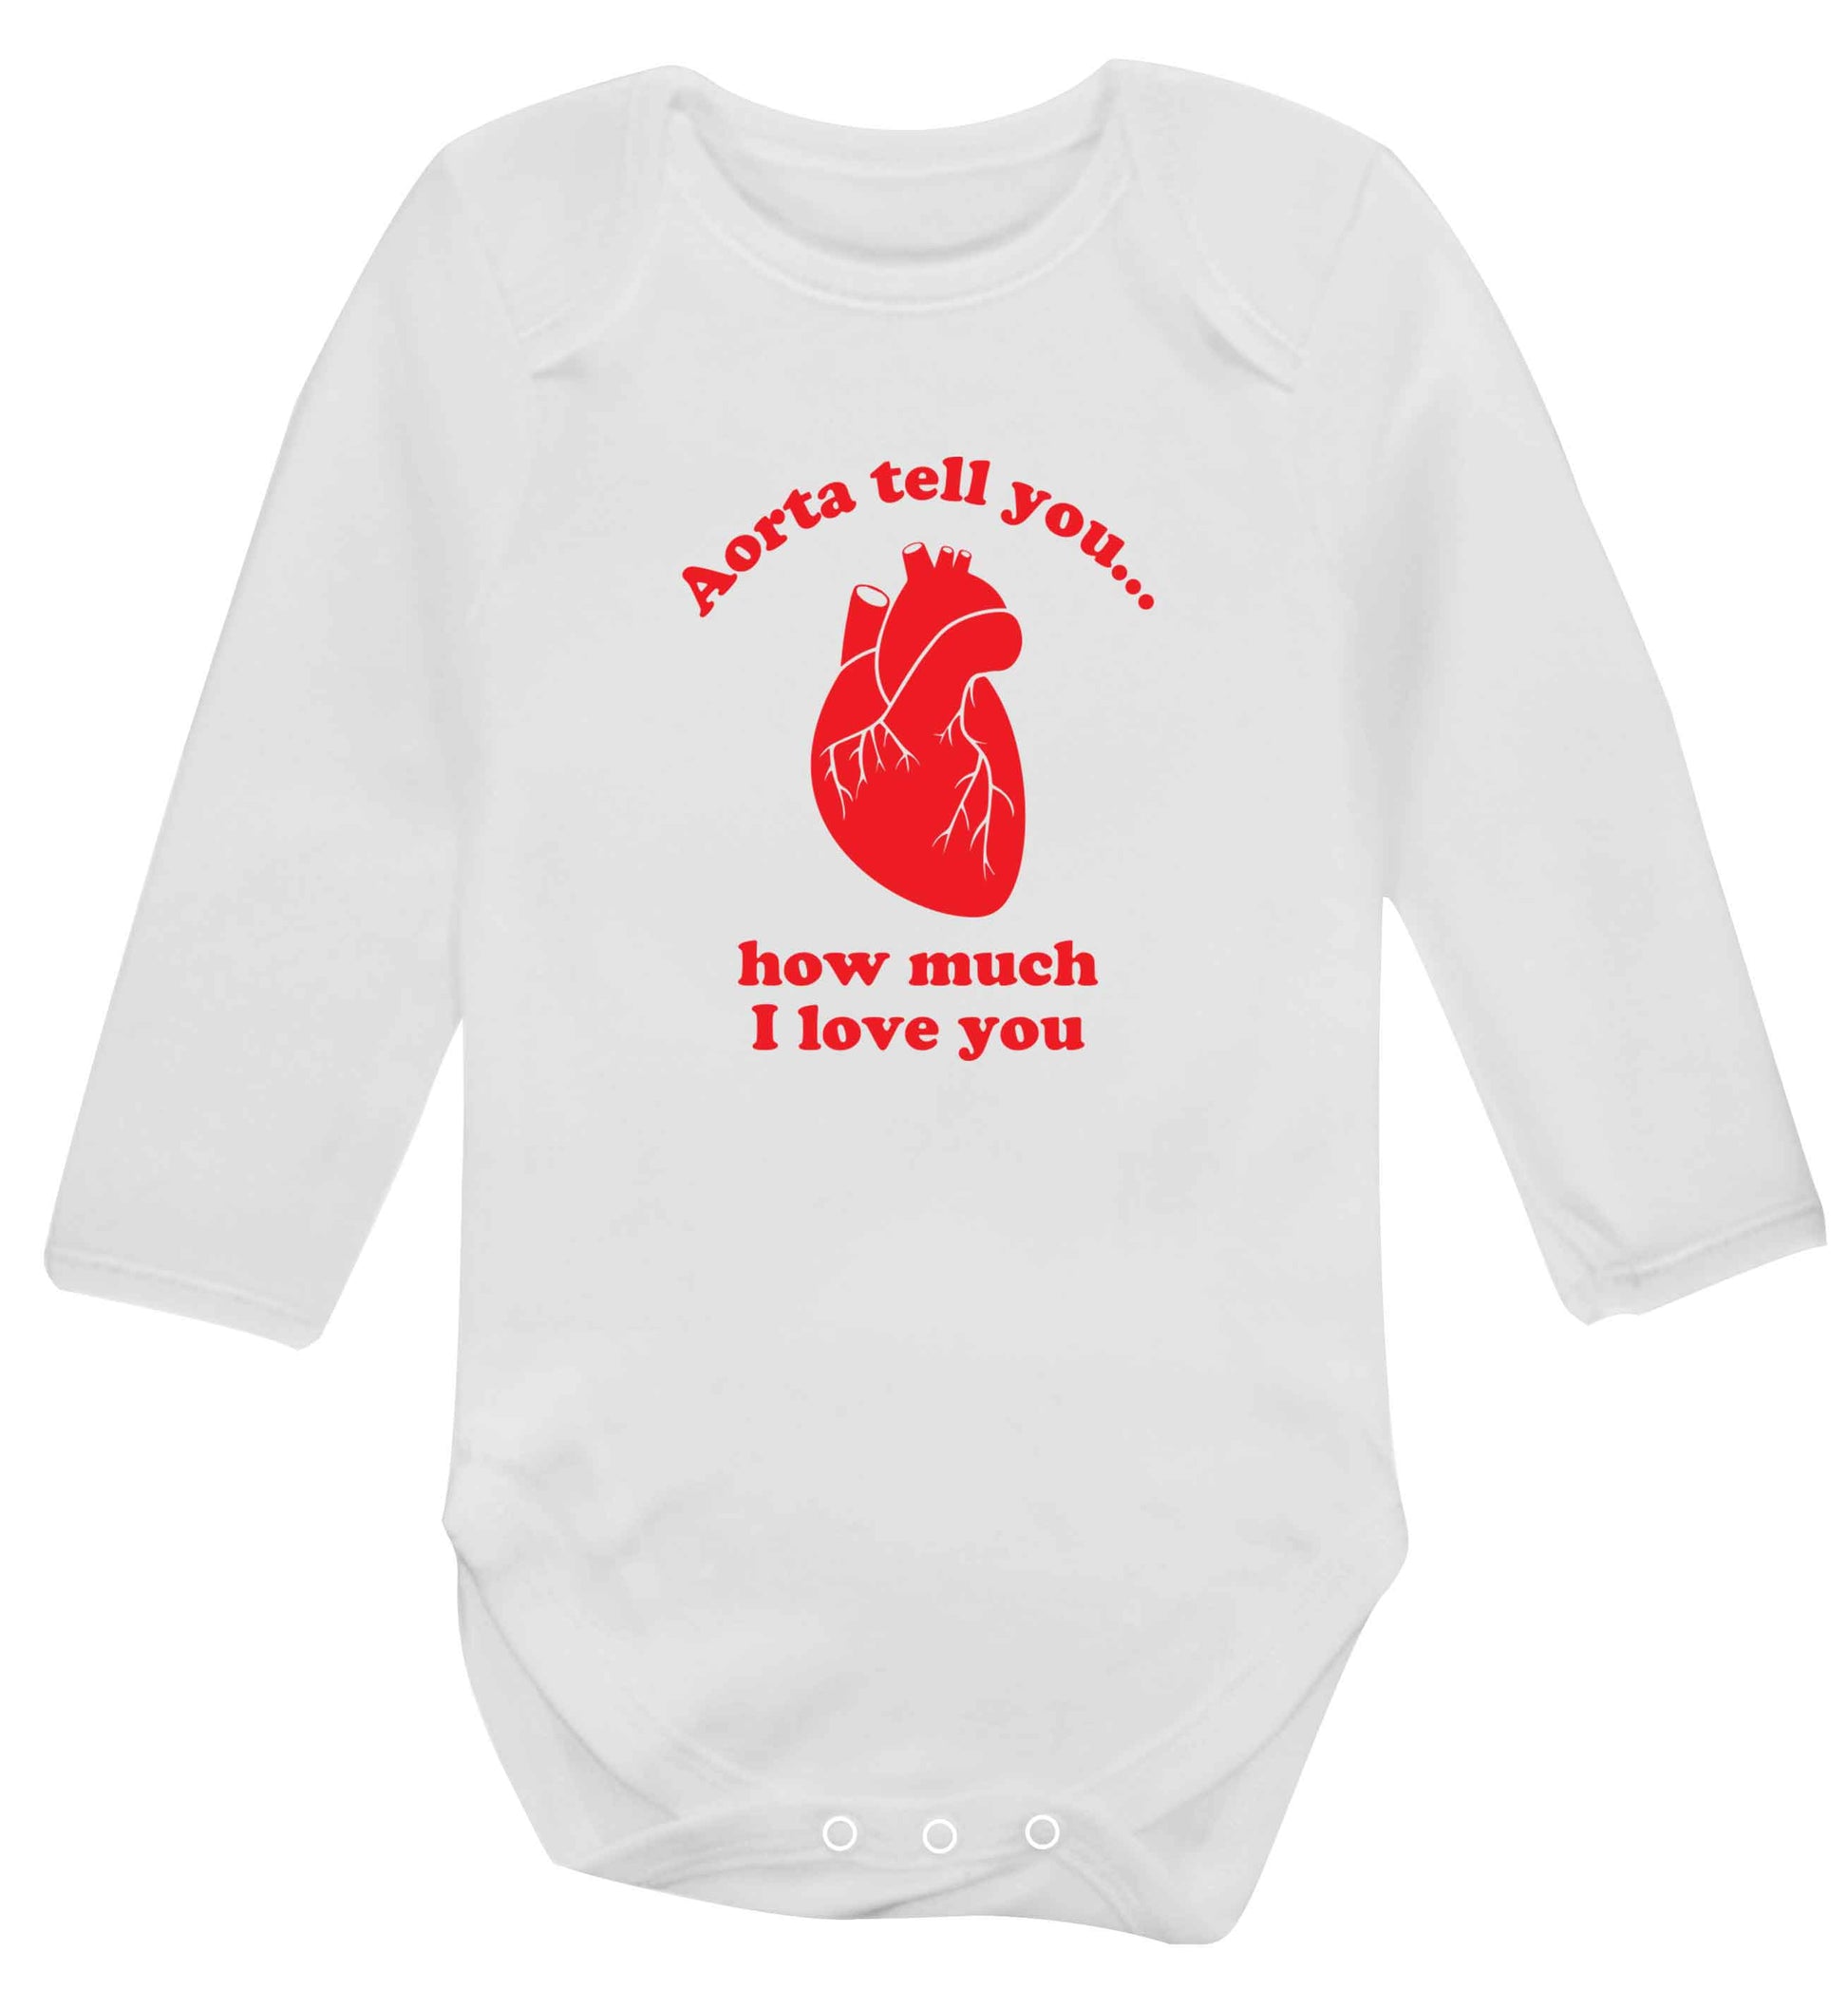 Aorta tell you how much I love you baby vest long sleeved white 6-12 months